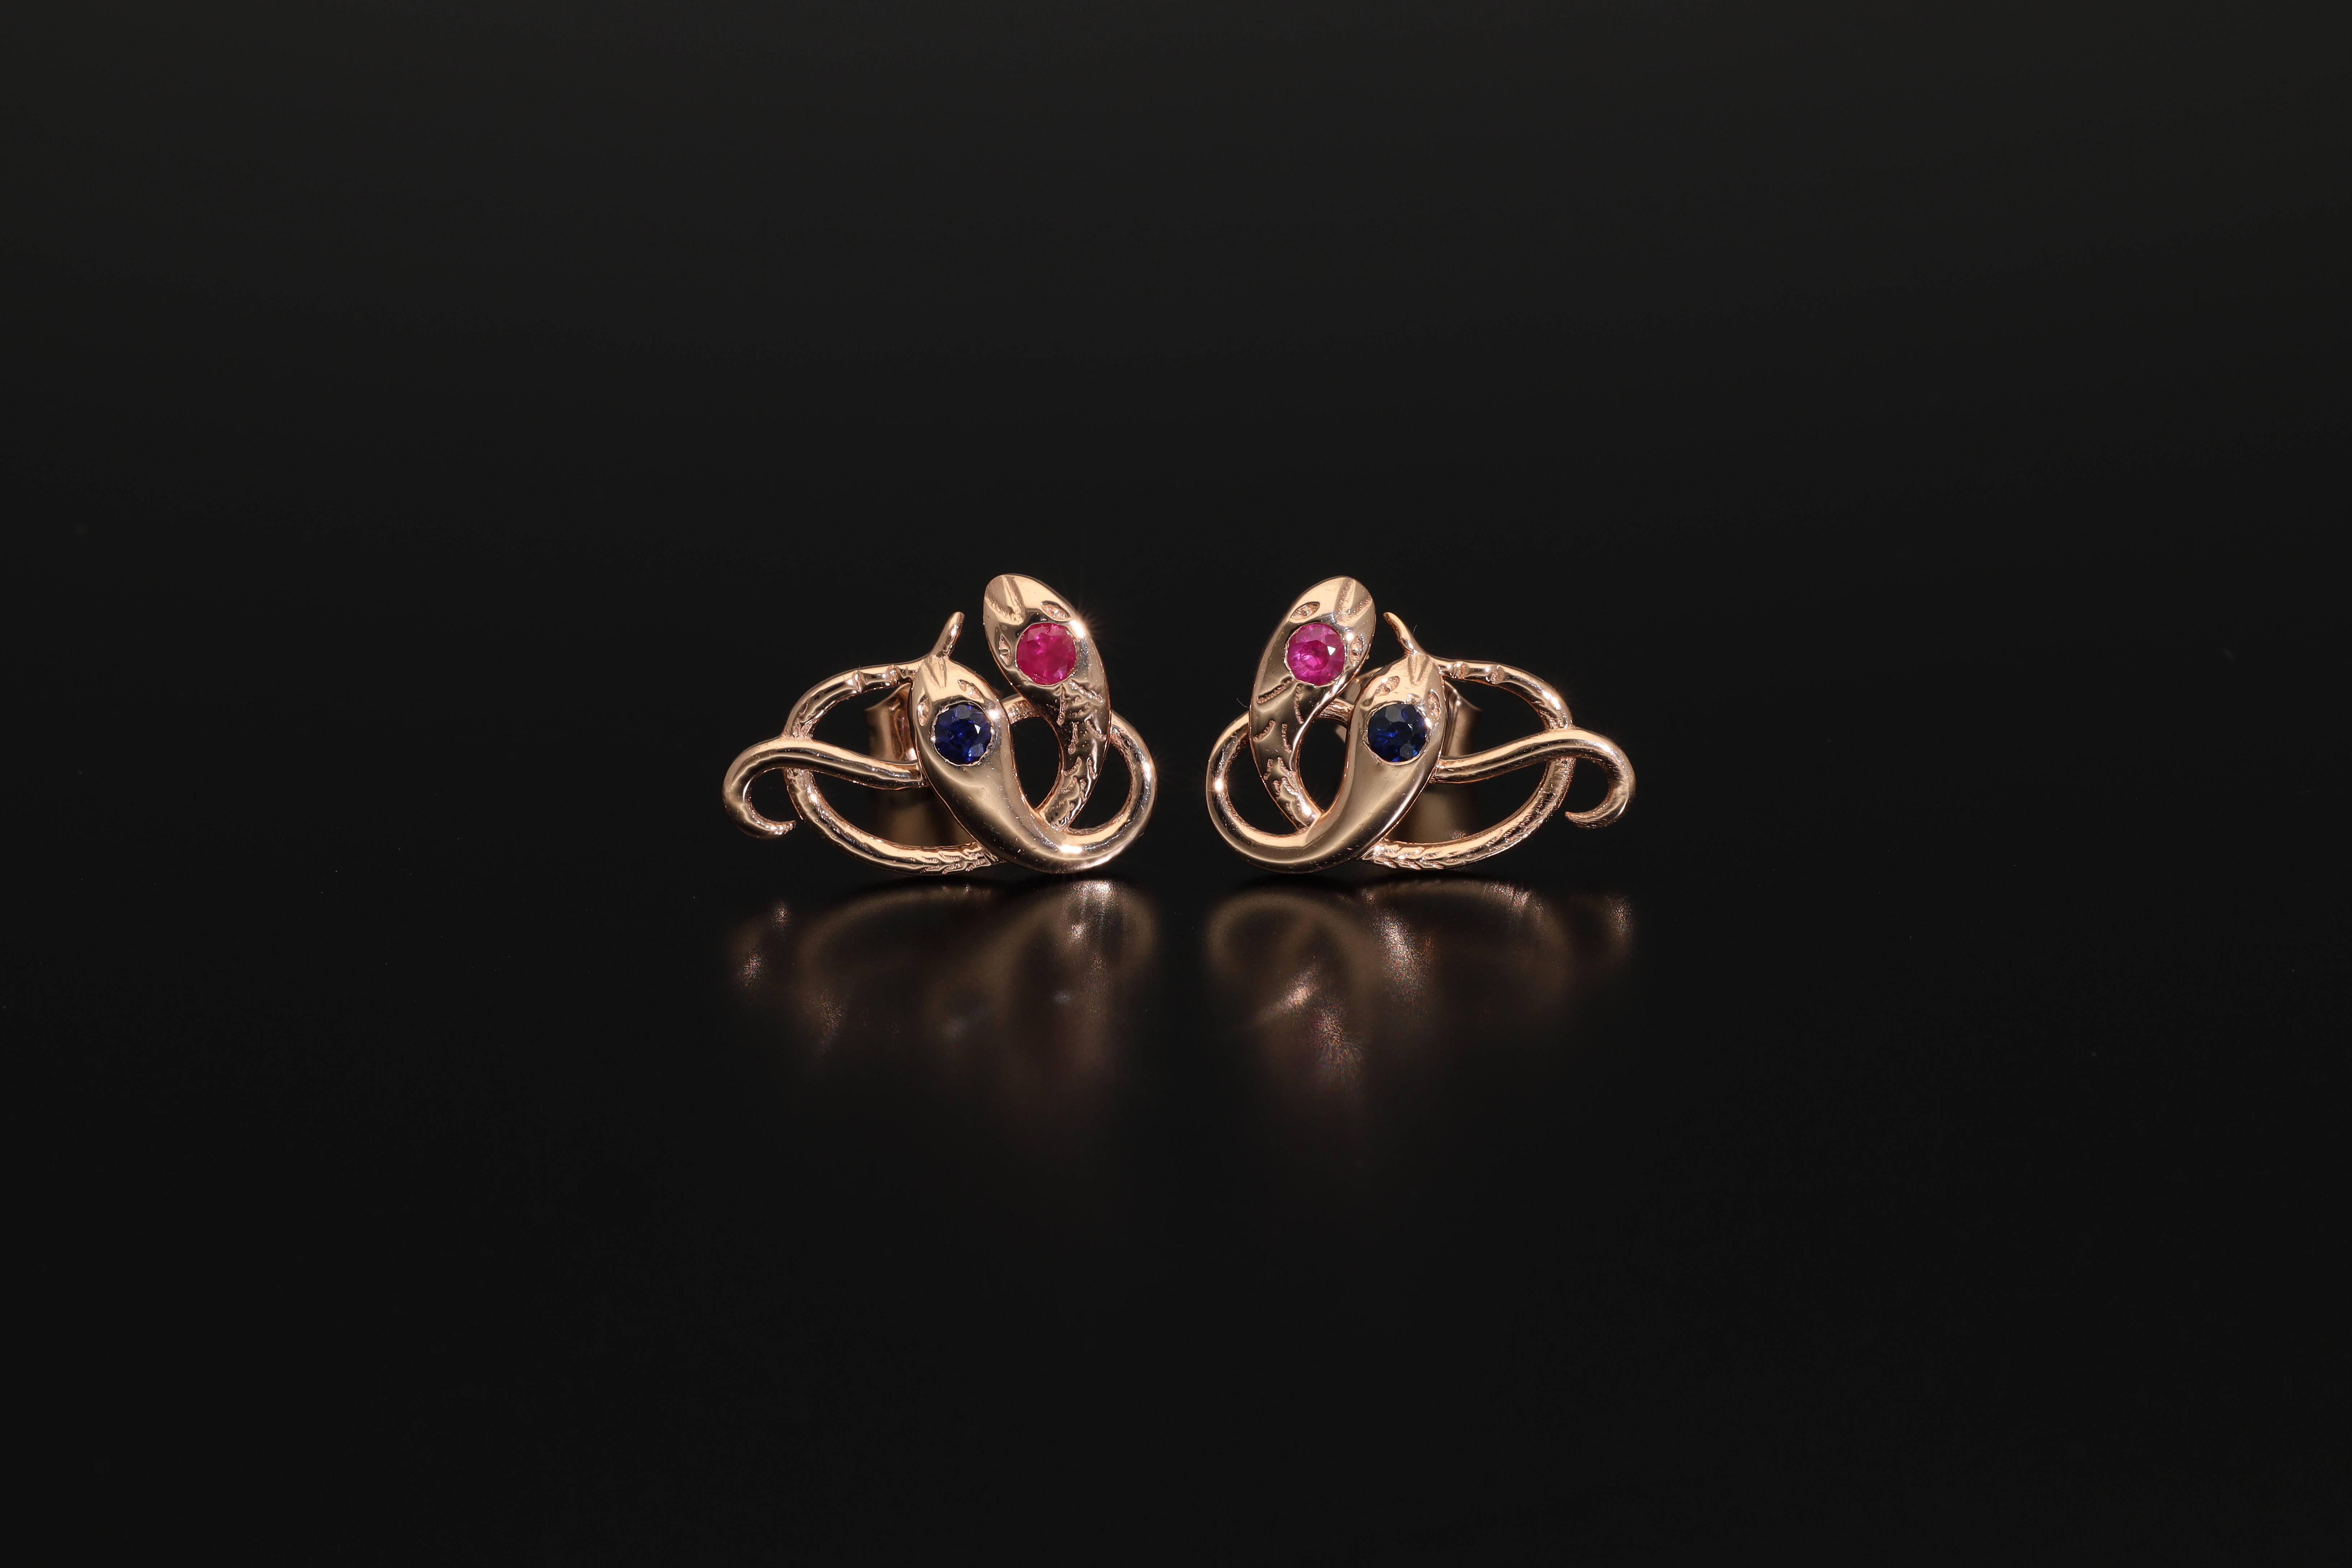 A  beautiful antique revival pair of rose gold snake stud earrings! These unique statement earrings are made of solid 14 karat gold and are set with natural rubies and sapphires.

Snake rings were extremely popular in Victorian/Edwardian jewellery